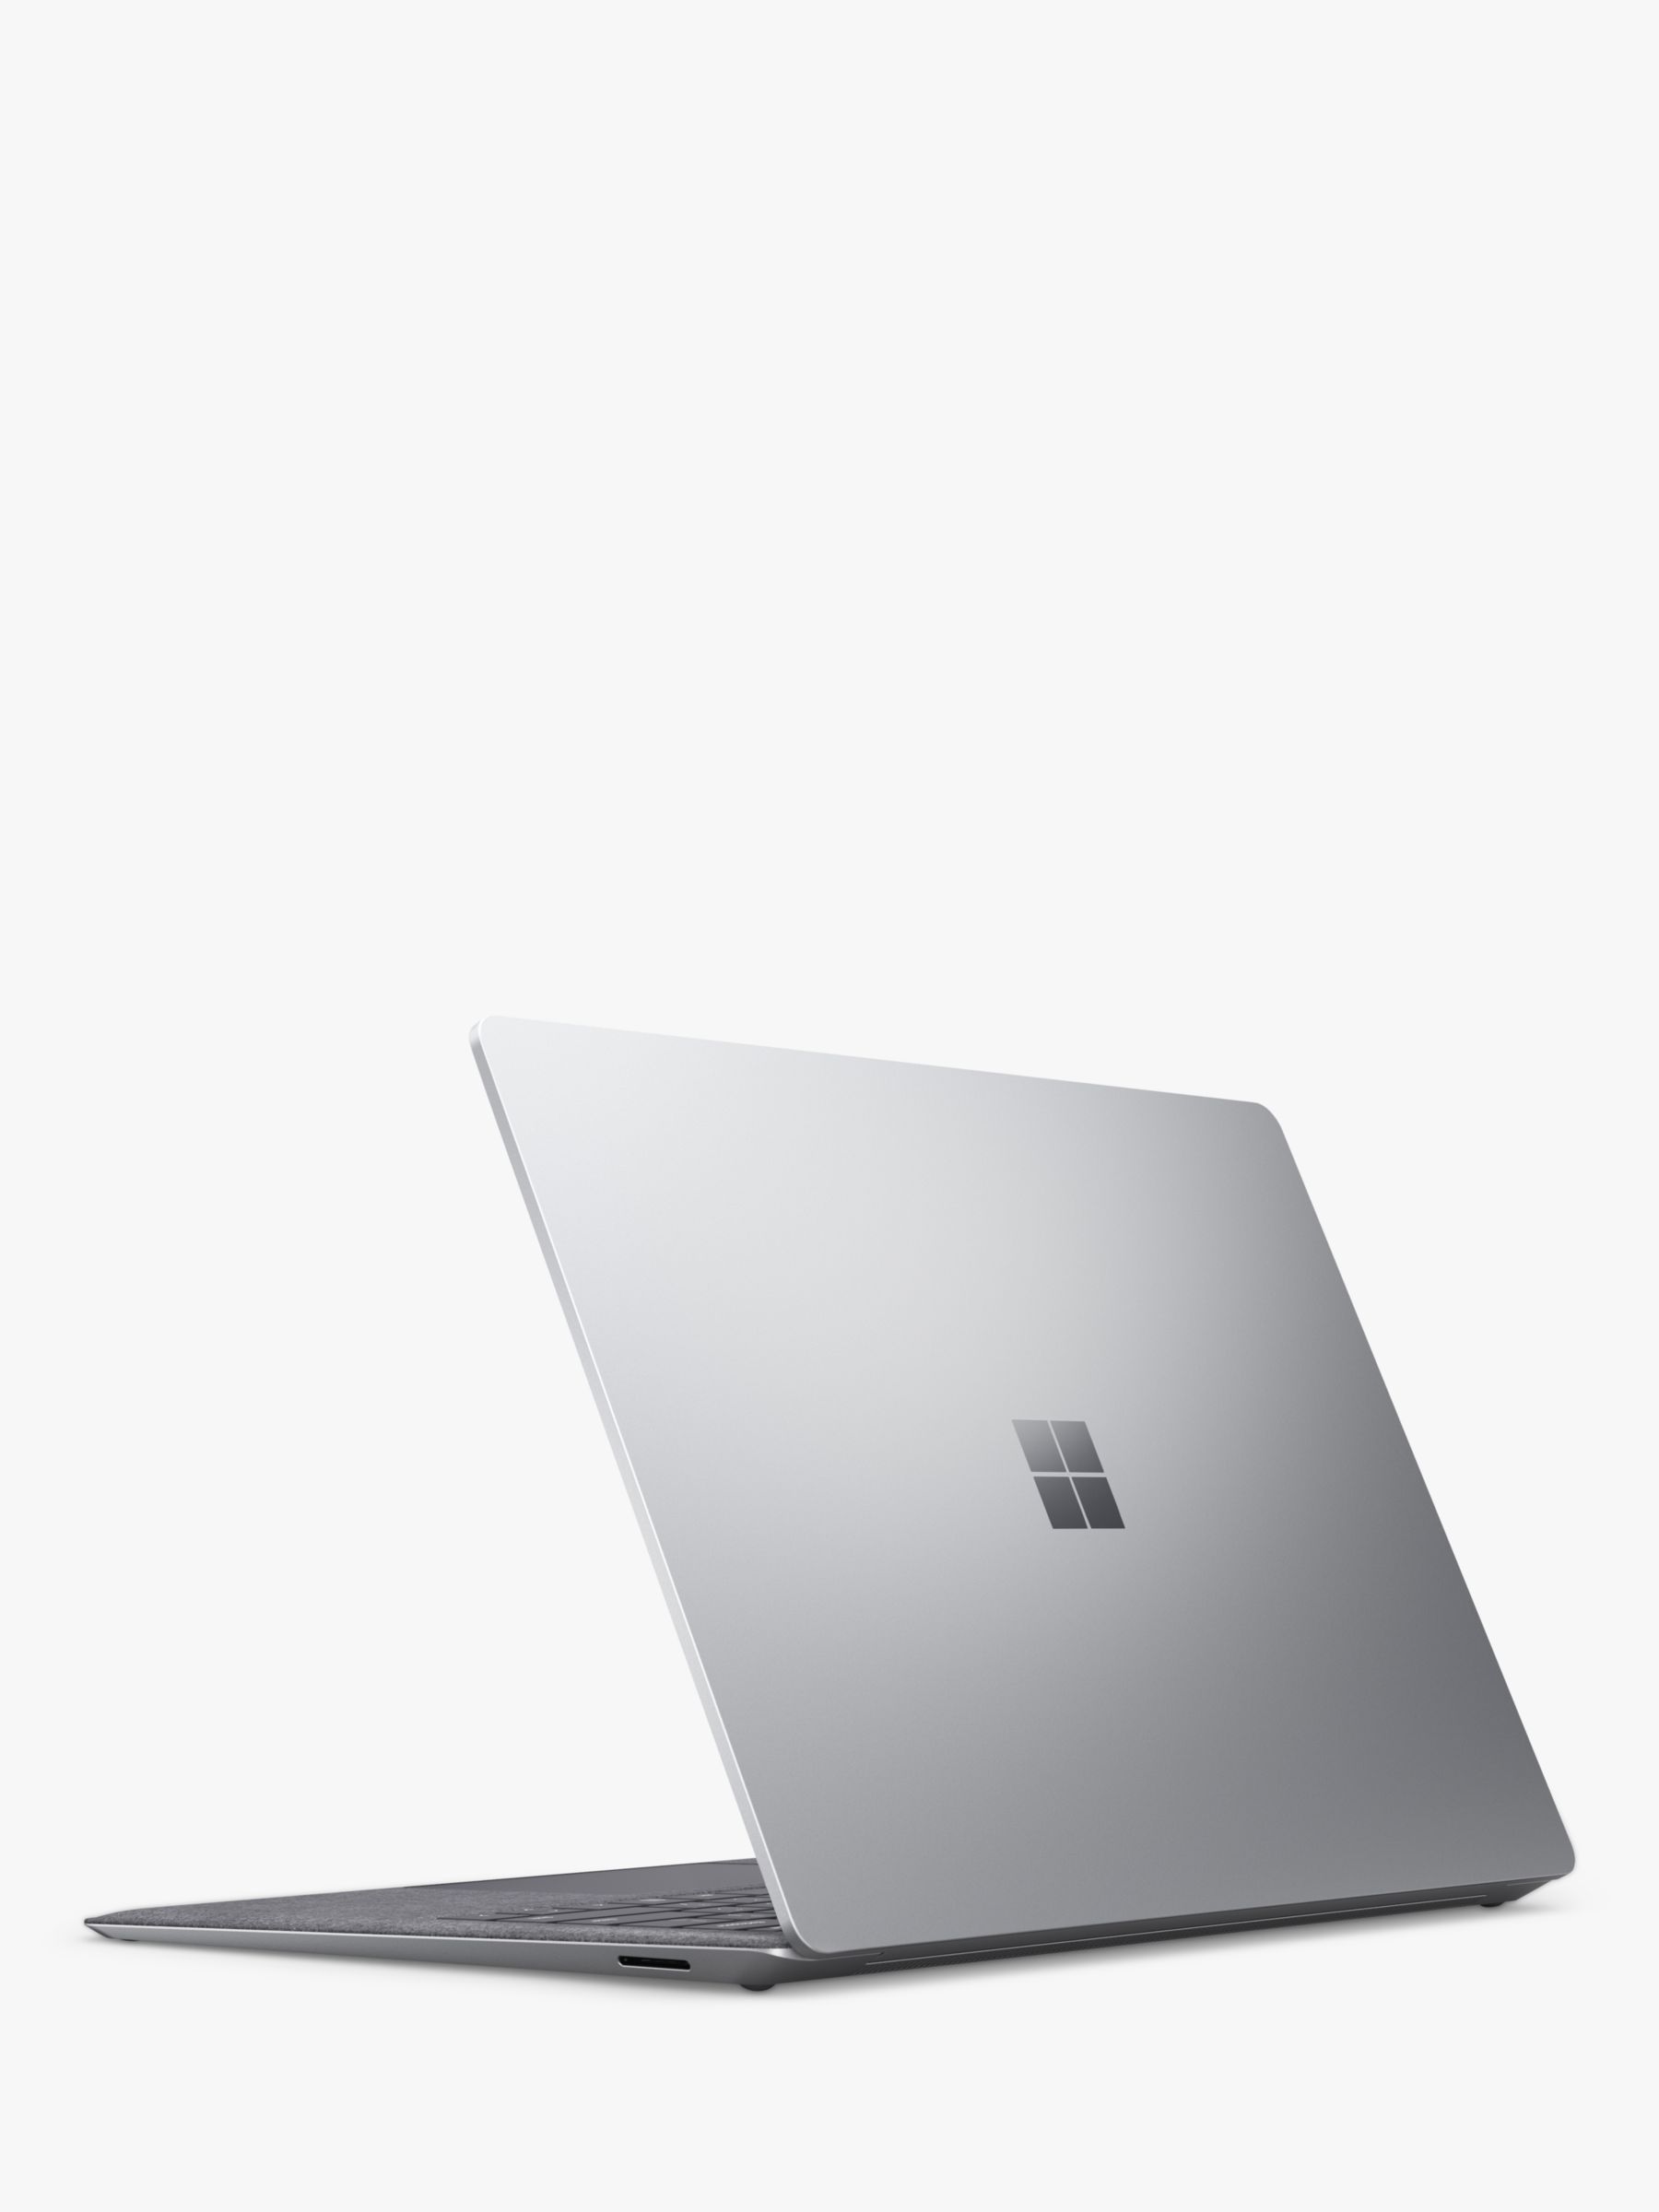 Microsoft Surface Laptop 5 review: a stylish PC for everyday computing